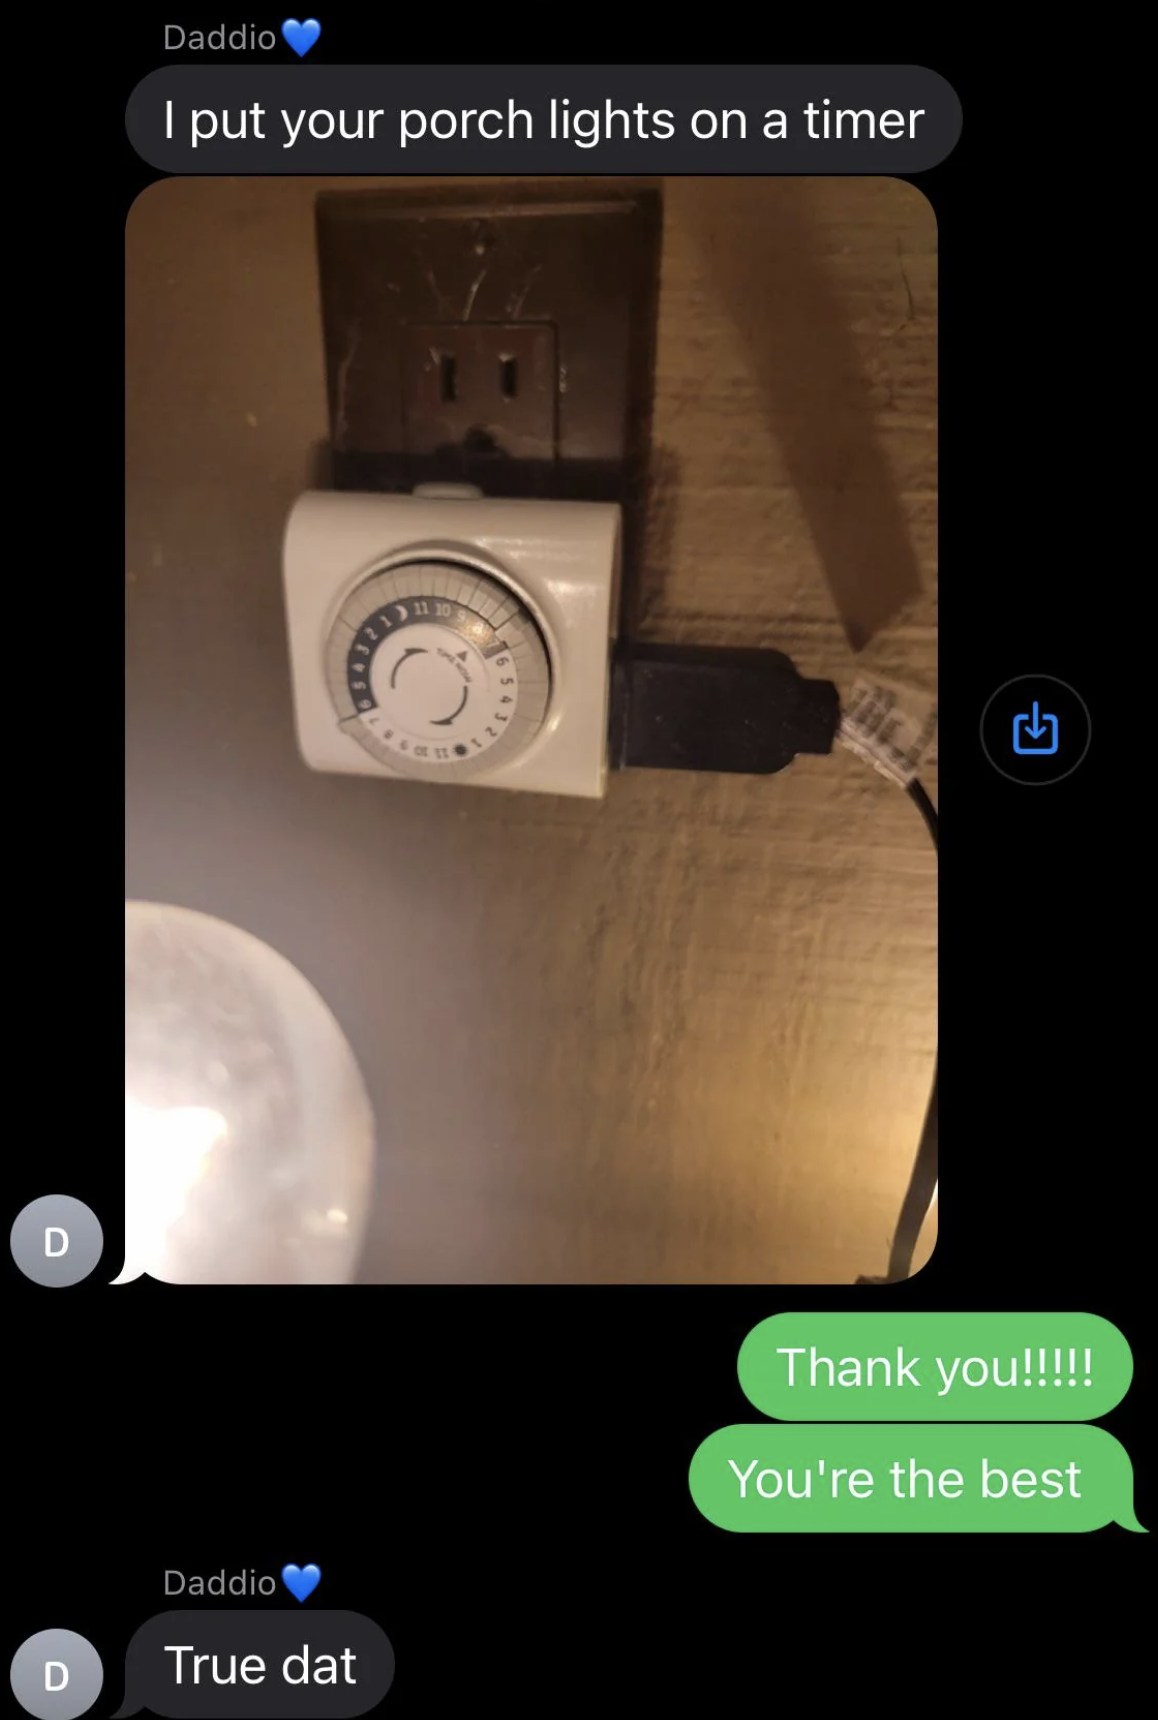 A text message exchange shows a plug-in timer on a wall socket and gratitude for setting porch lights on a timer